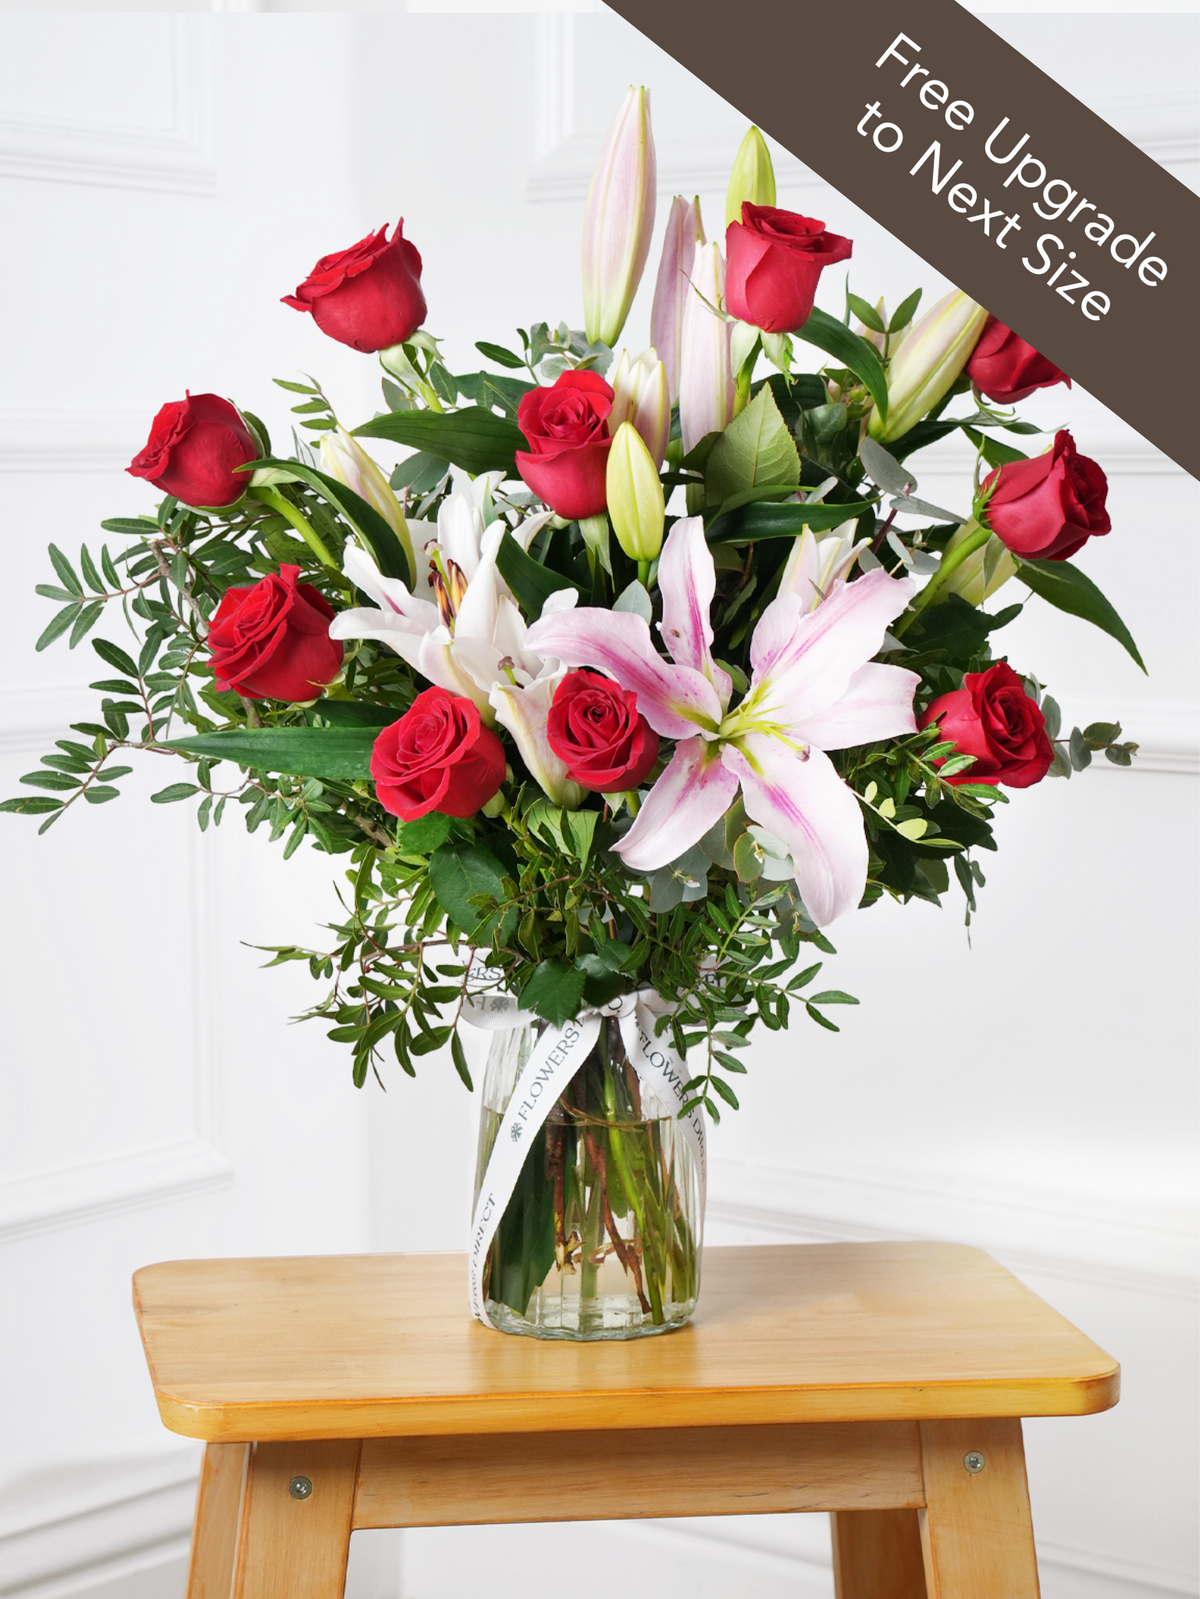 Red Roses and Pink Lily - Vase with Free Upgrade to Next Size